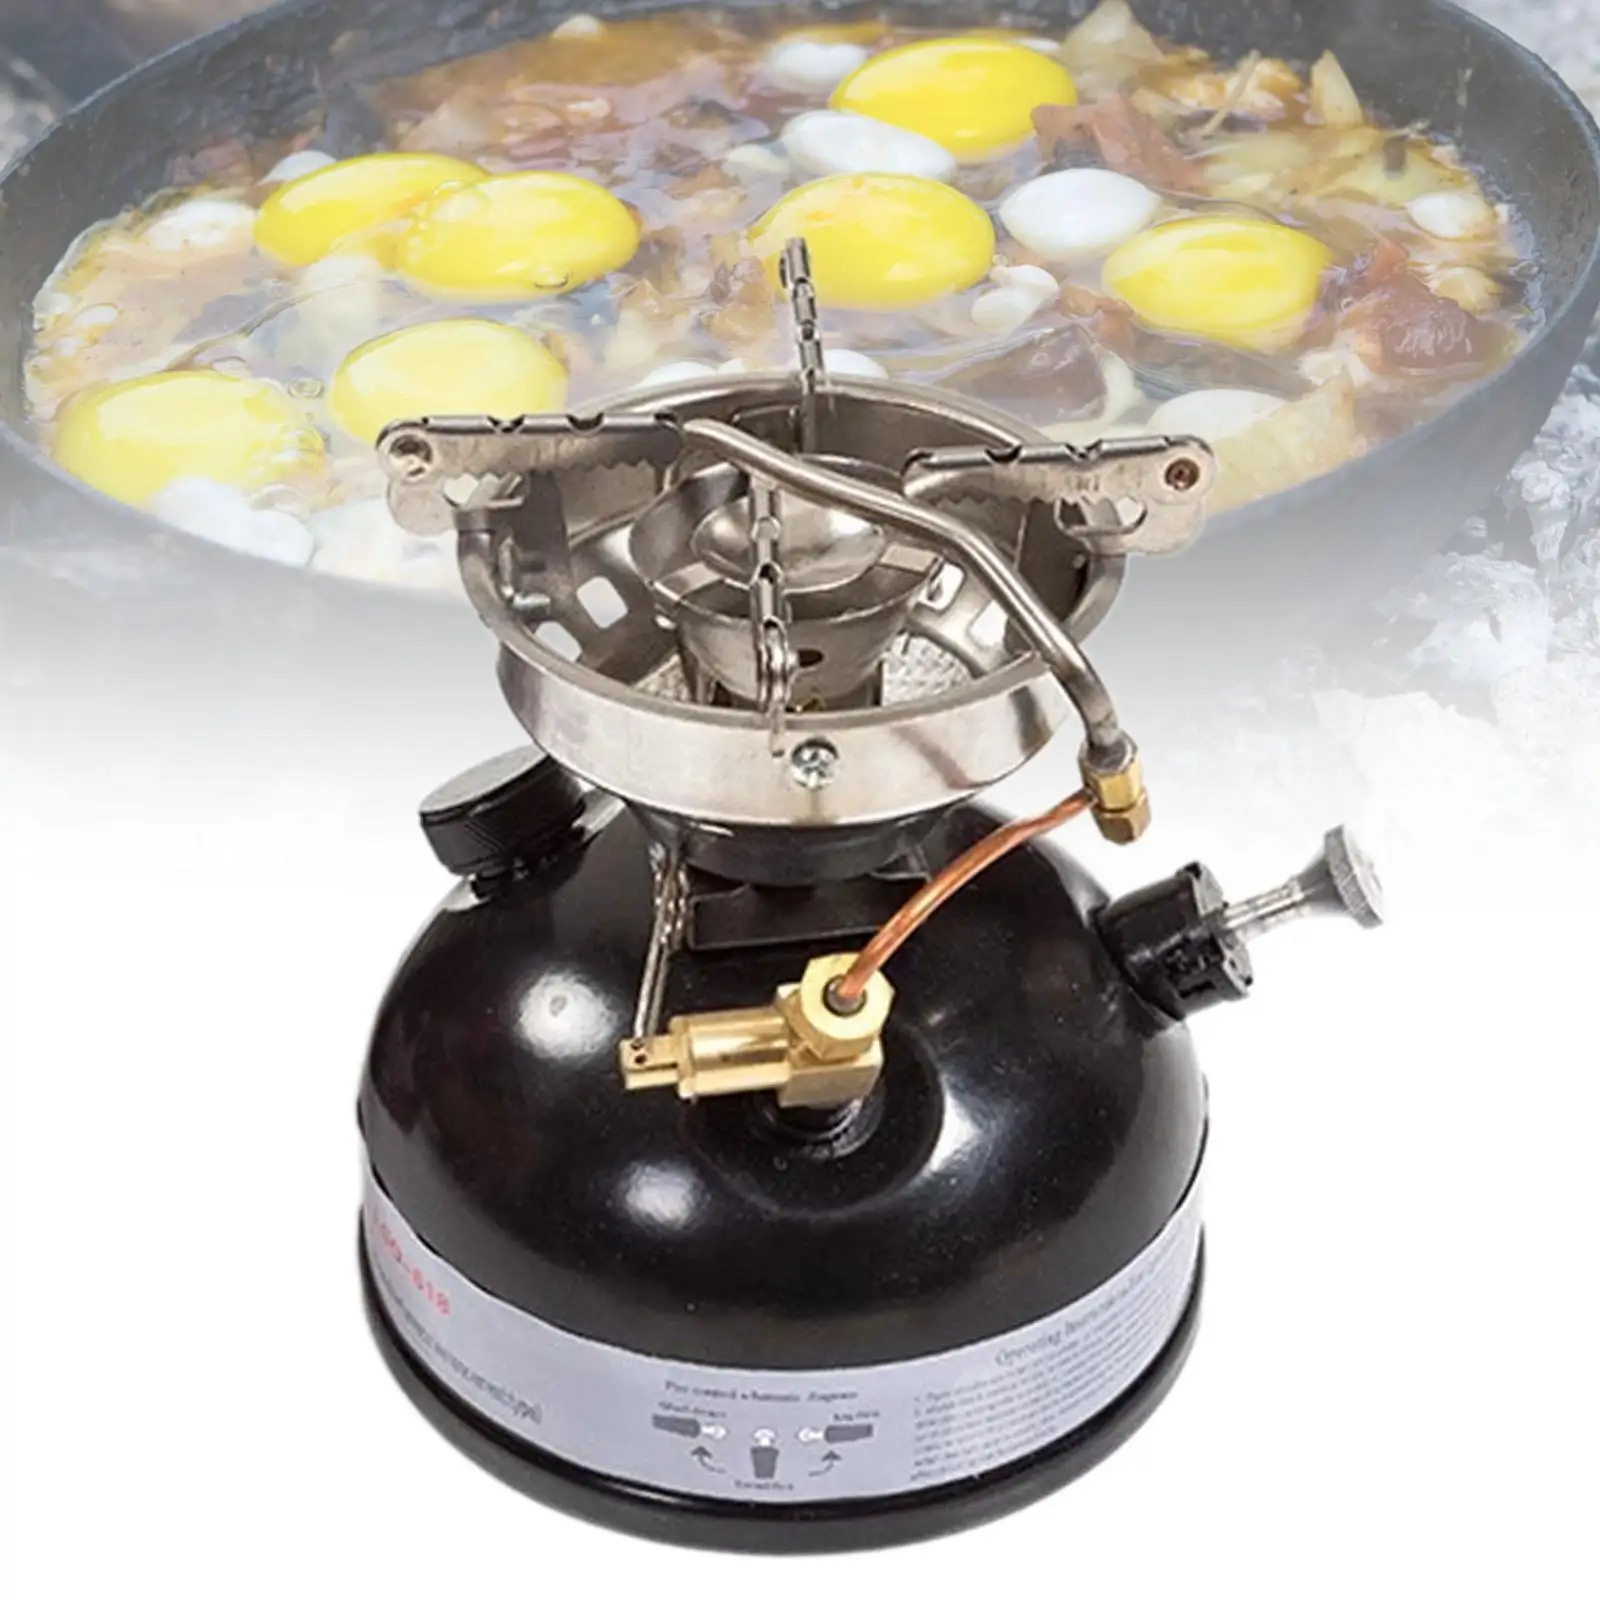 

Alcohol Stove Pot Holder Stable Multiuse Cooking Tool Backpacking Stove Alcohol Furnace for Outside BBQ Travel Camping Picnic